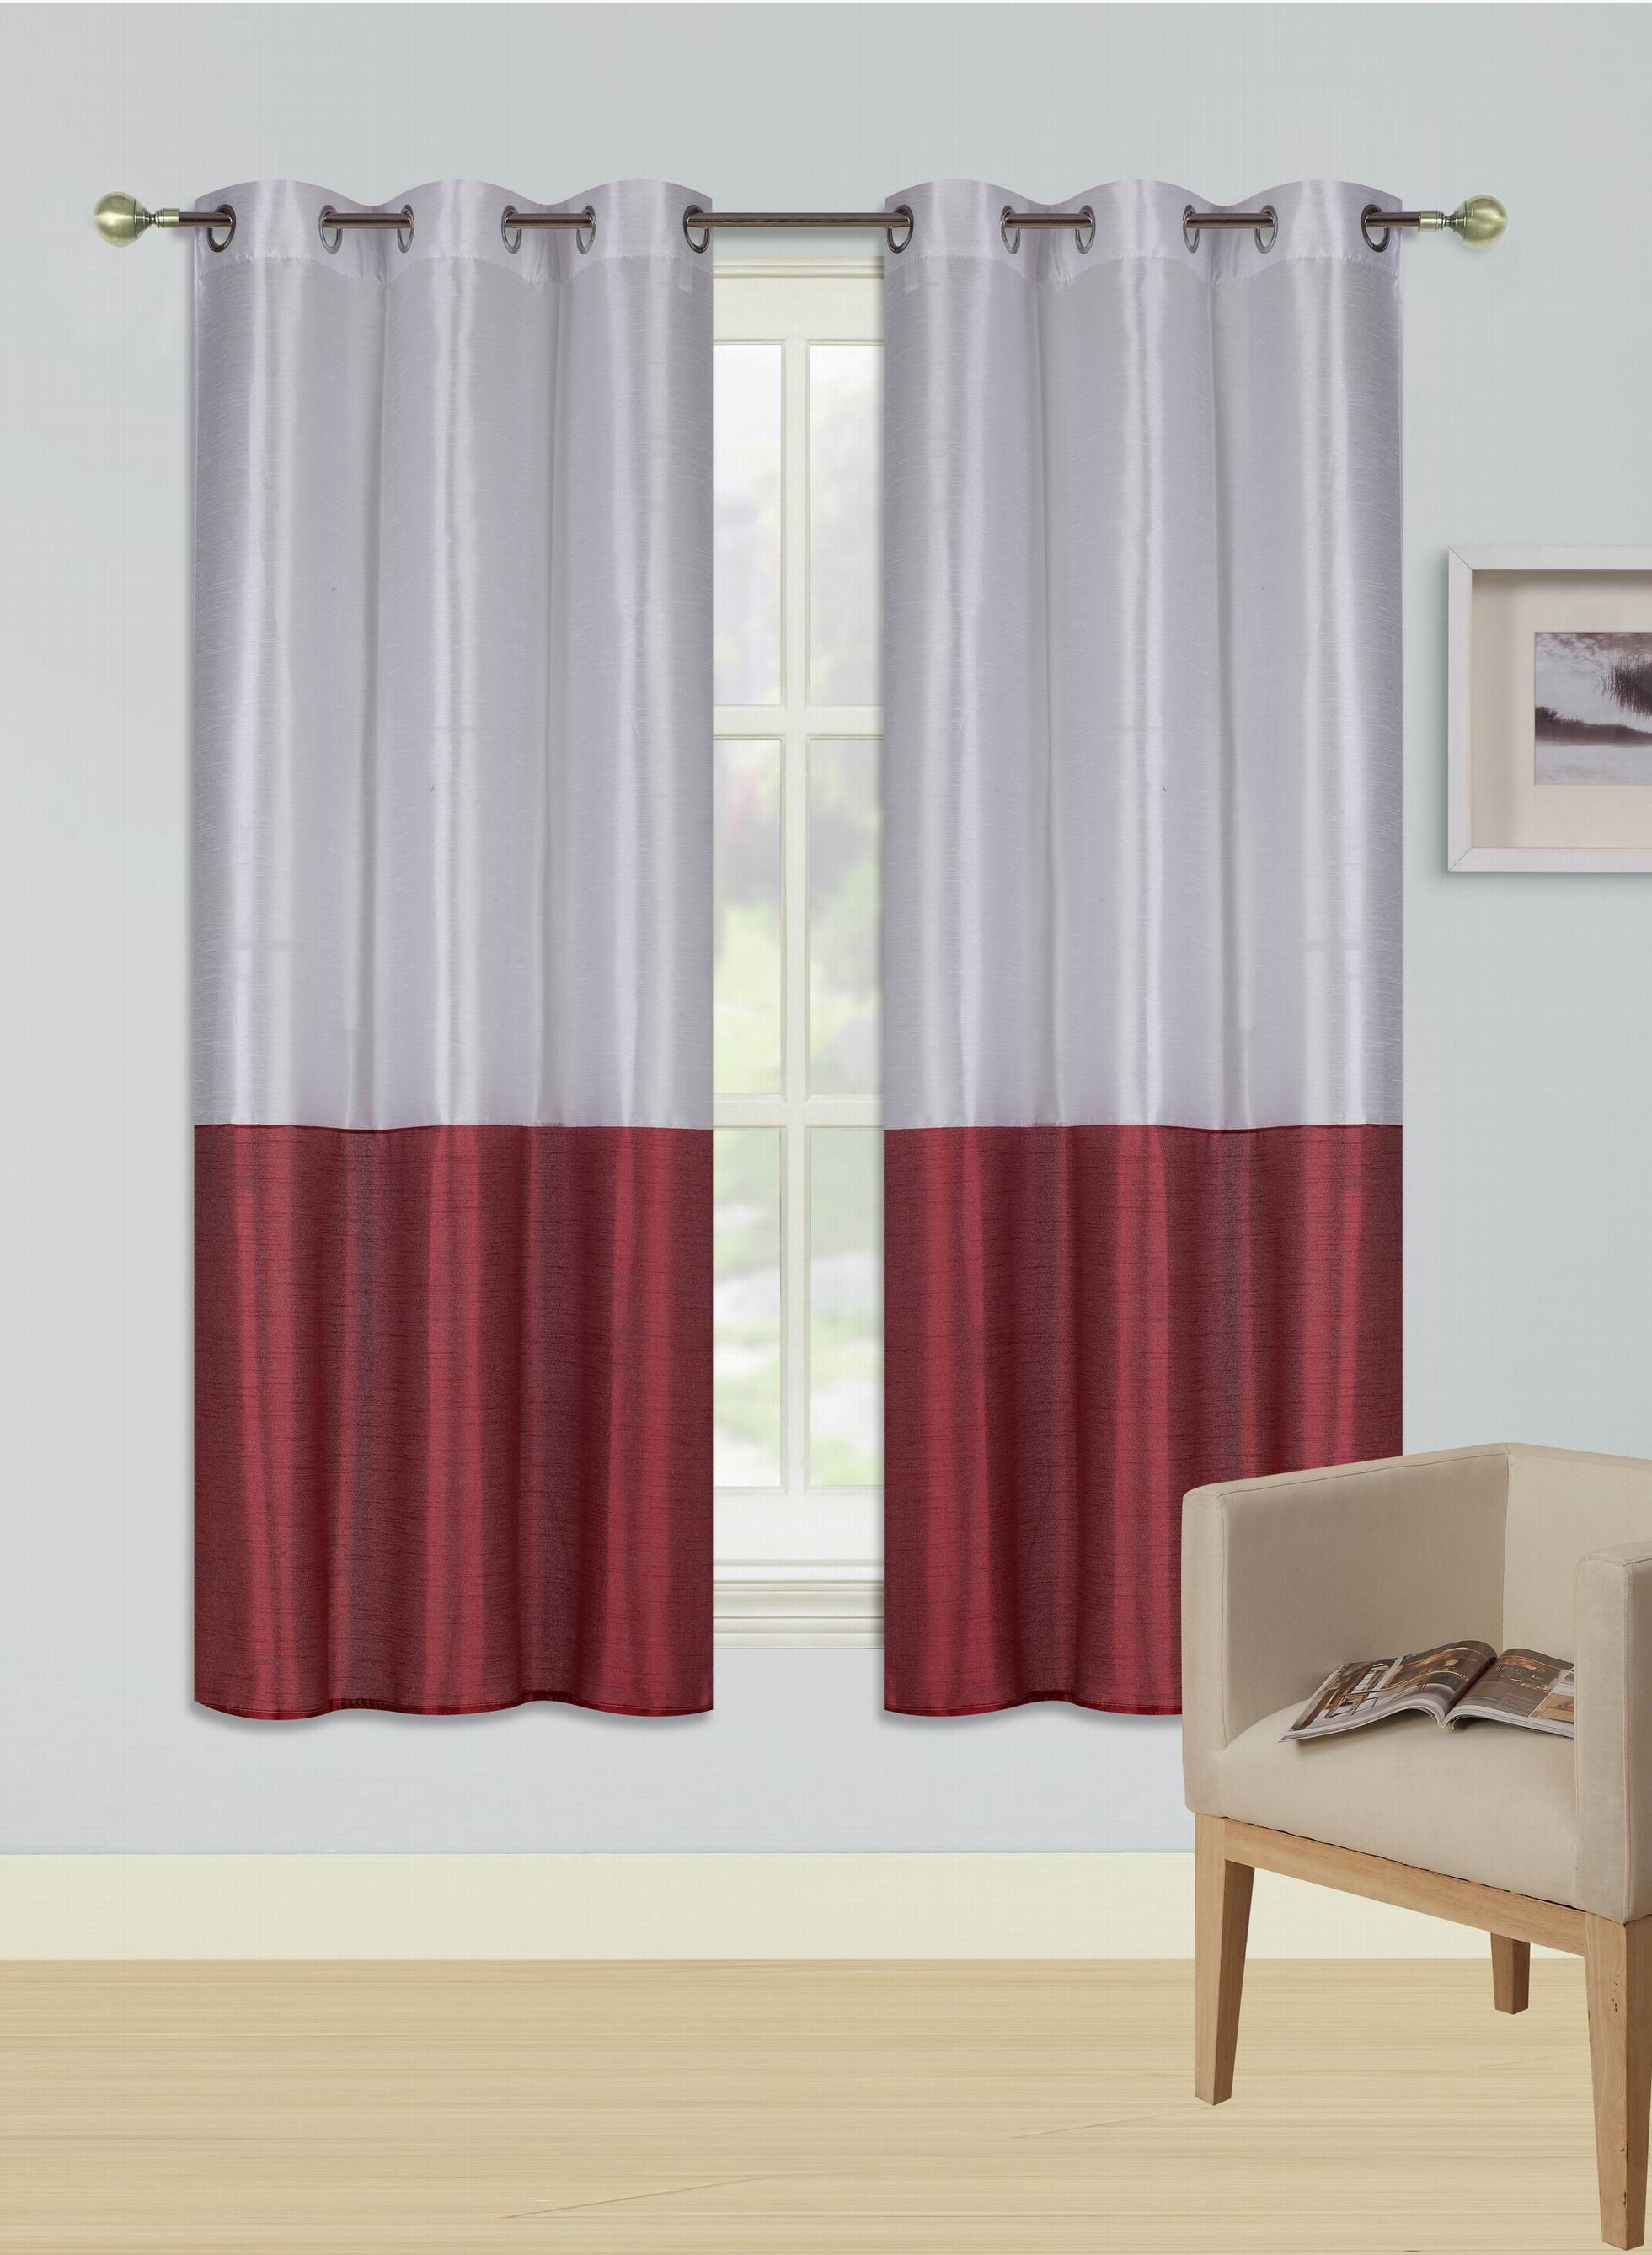 1PC New 2-TONE Window Curtain Grommet Panel Lined Blackout EID RED WHITE 